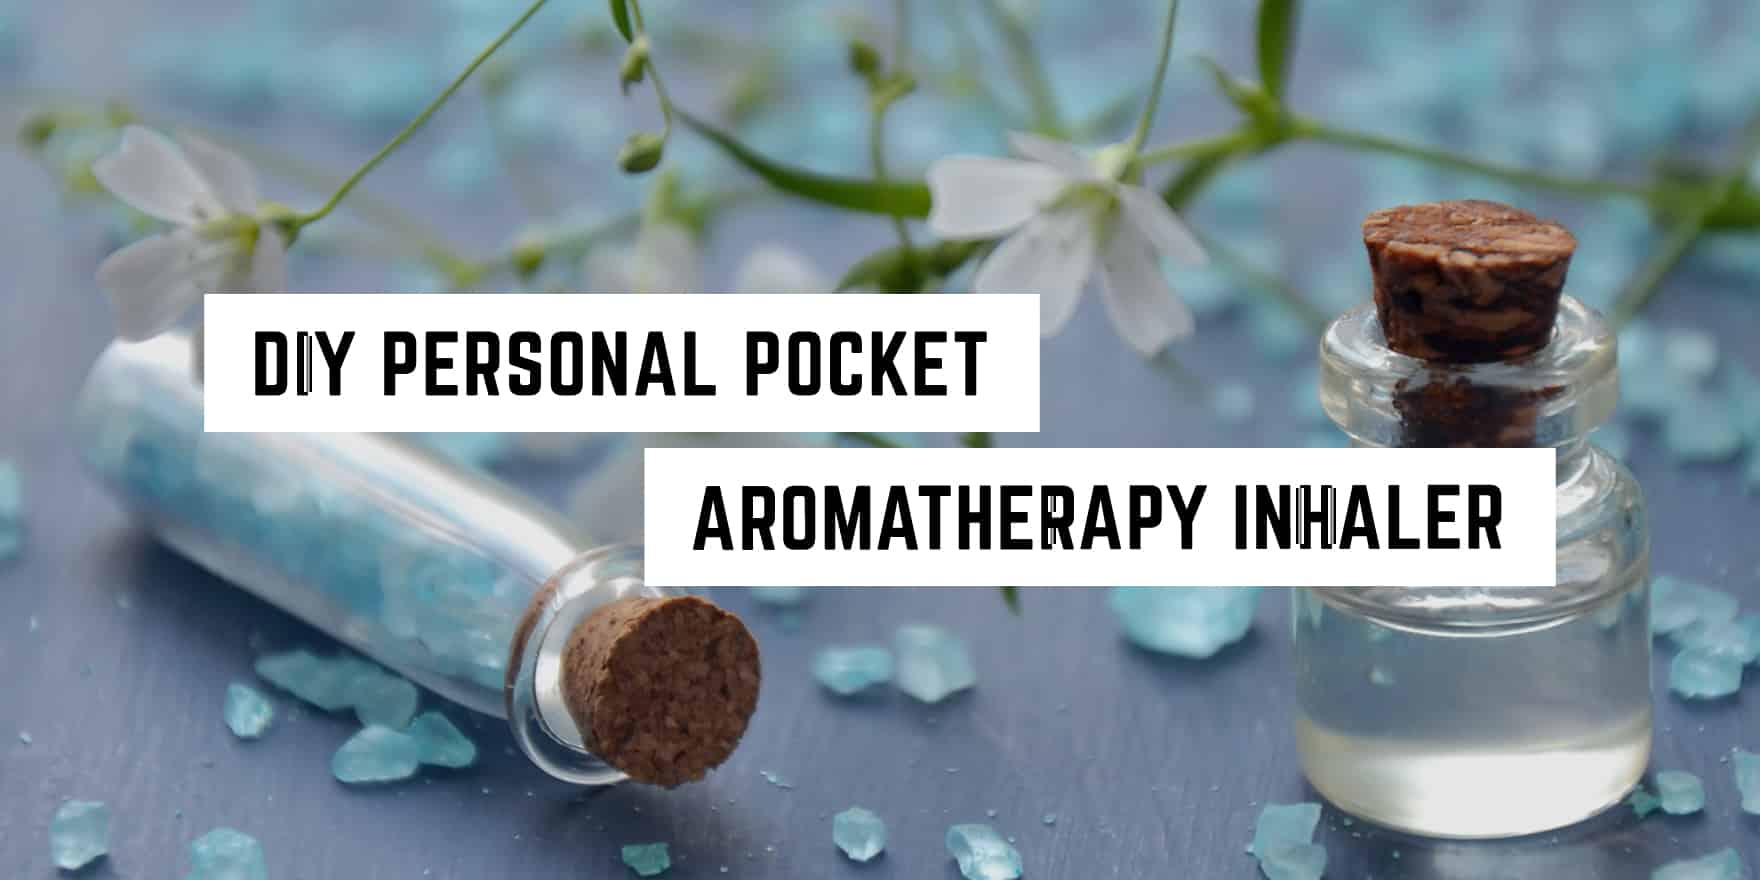 Create your own calm with this new age product: DIY personal pocket aromatherapy inhaler amidst tranquil blue petals.